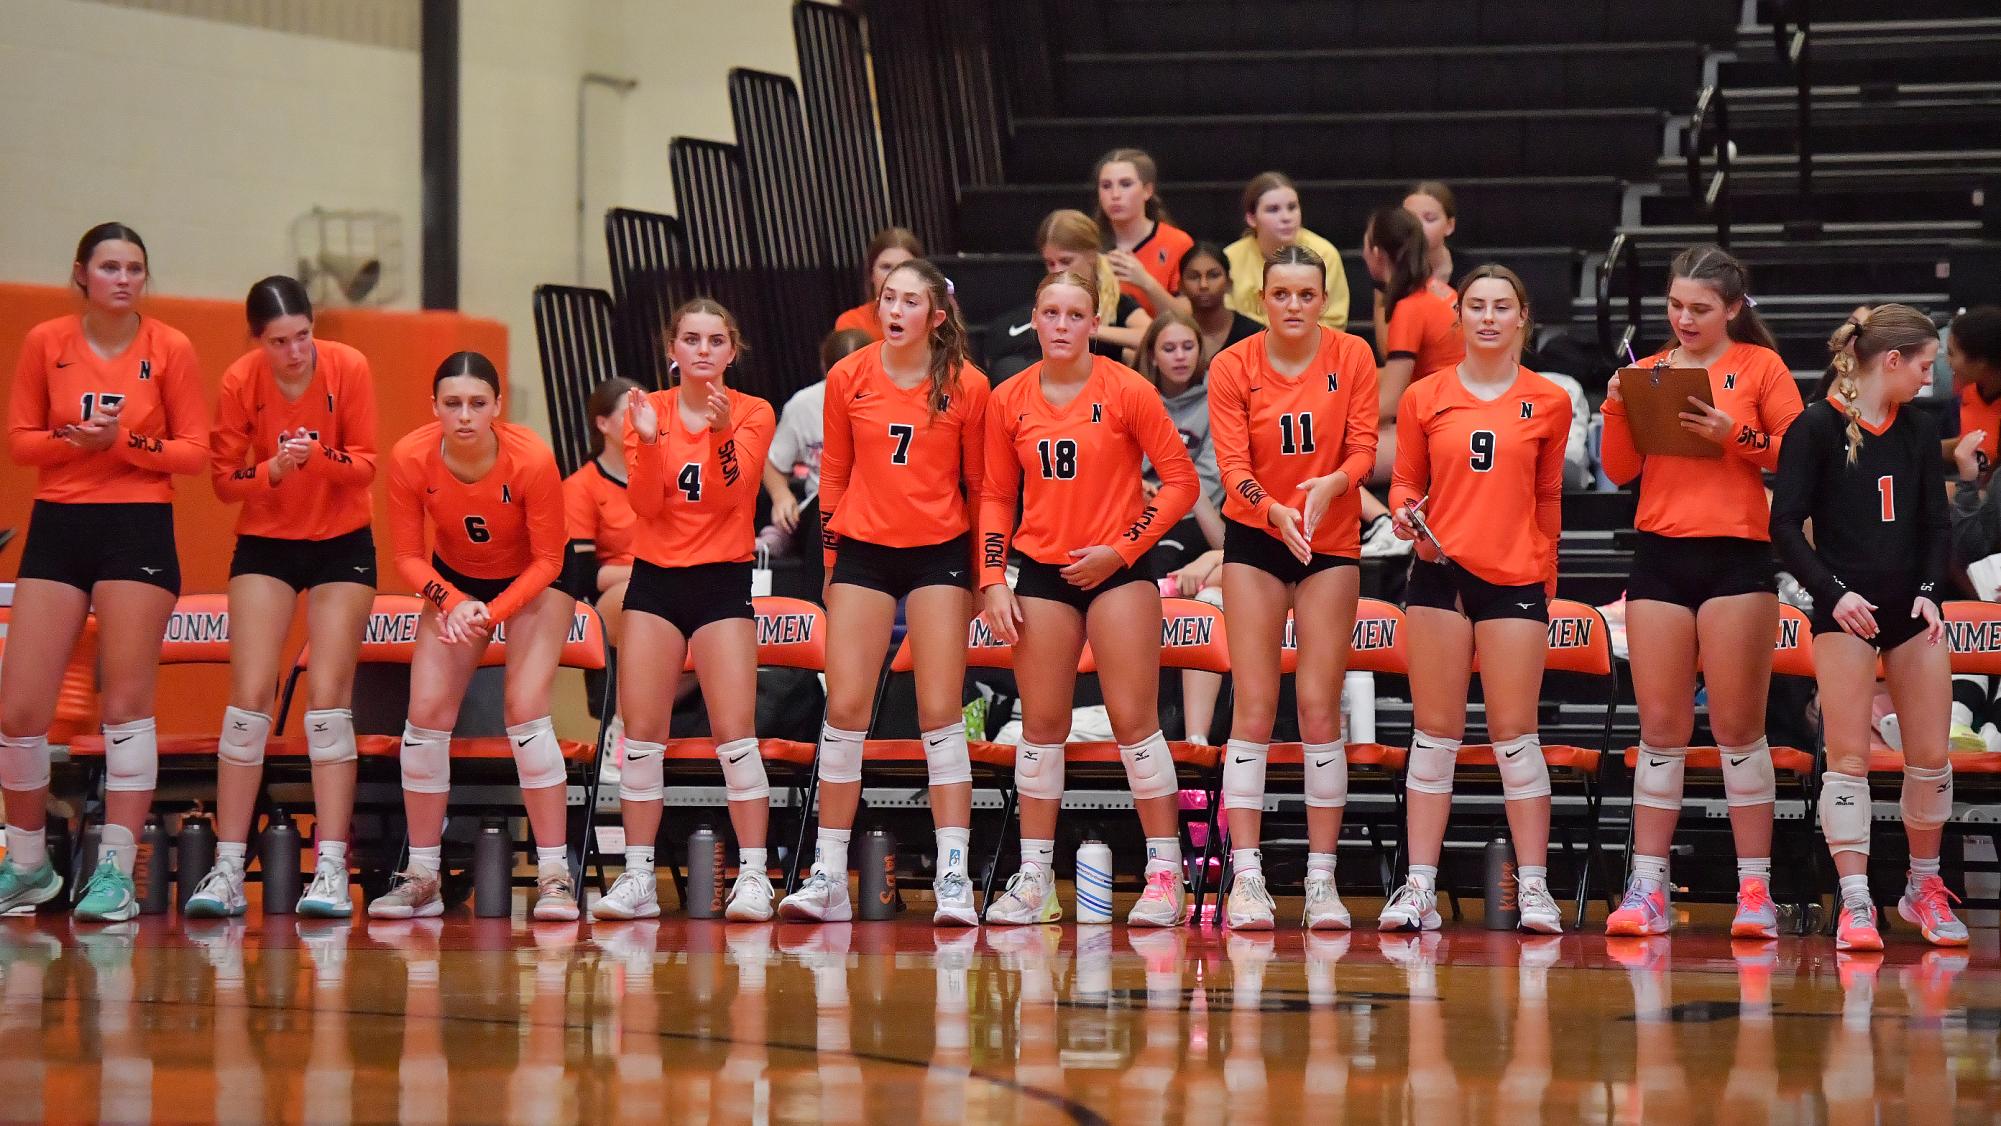 Community Volleyball Season Ends with Regional Championship Loss